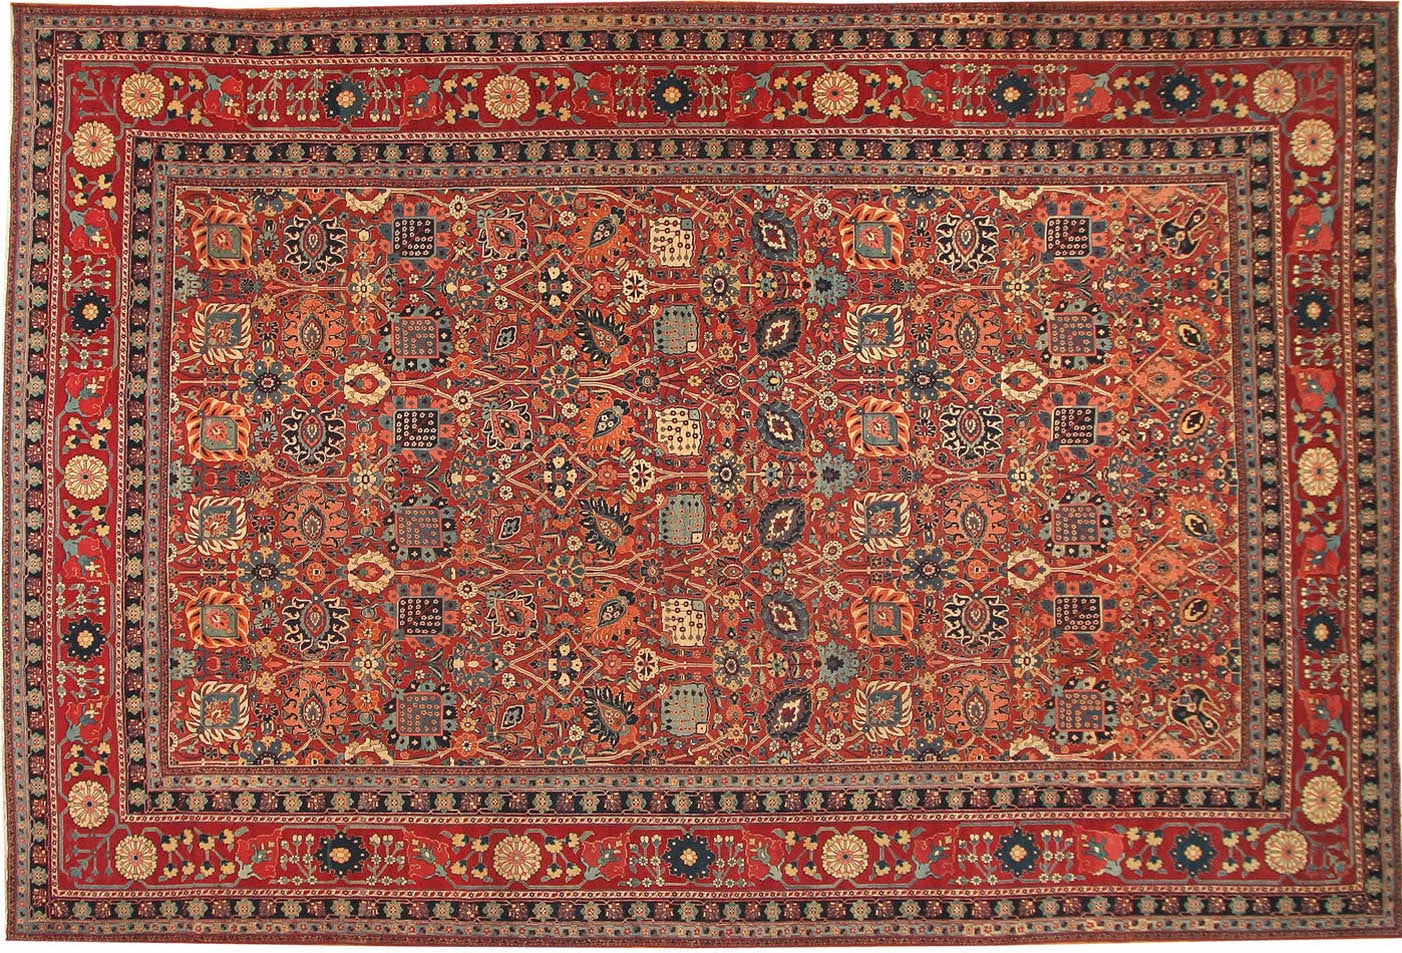 Know Your Rugs: Antique Rugs Value, Types And Differences etc.